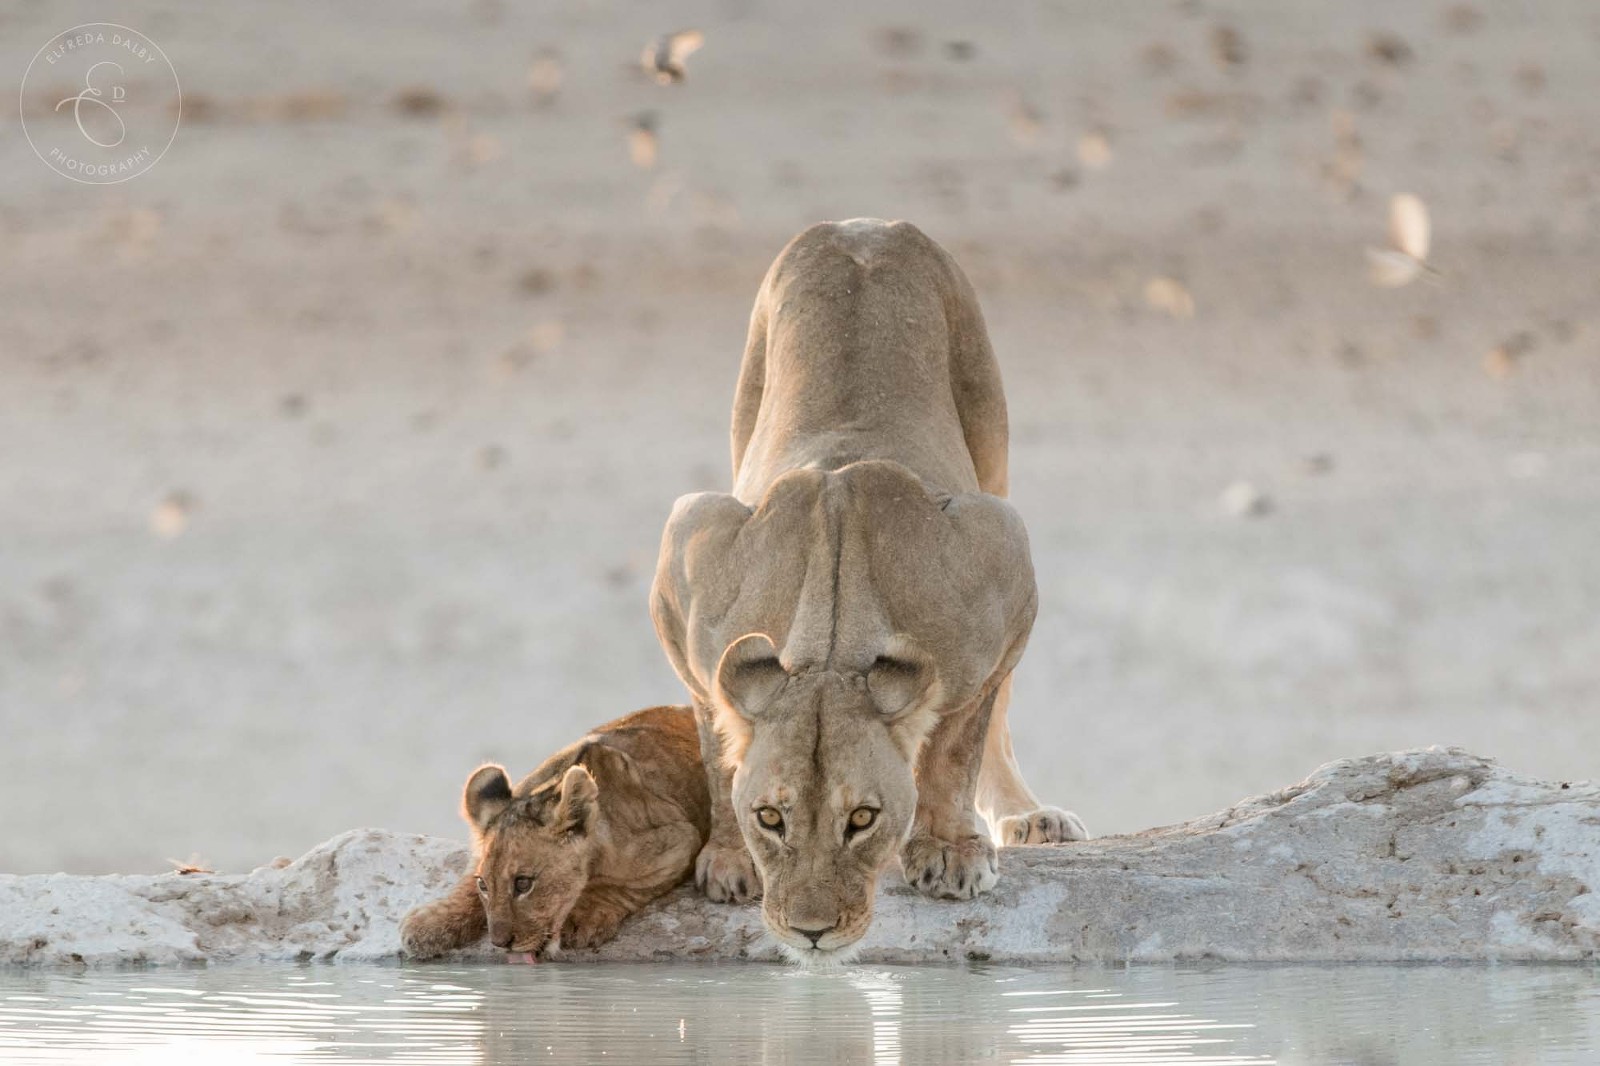 Lioness and her cub drinking water at a waterhole